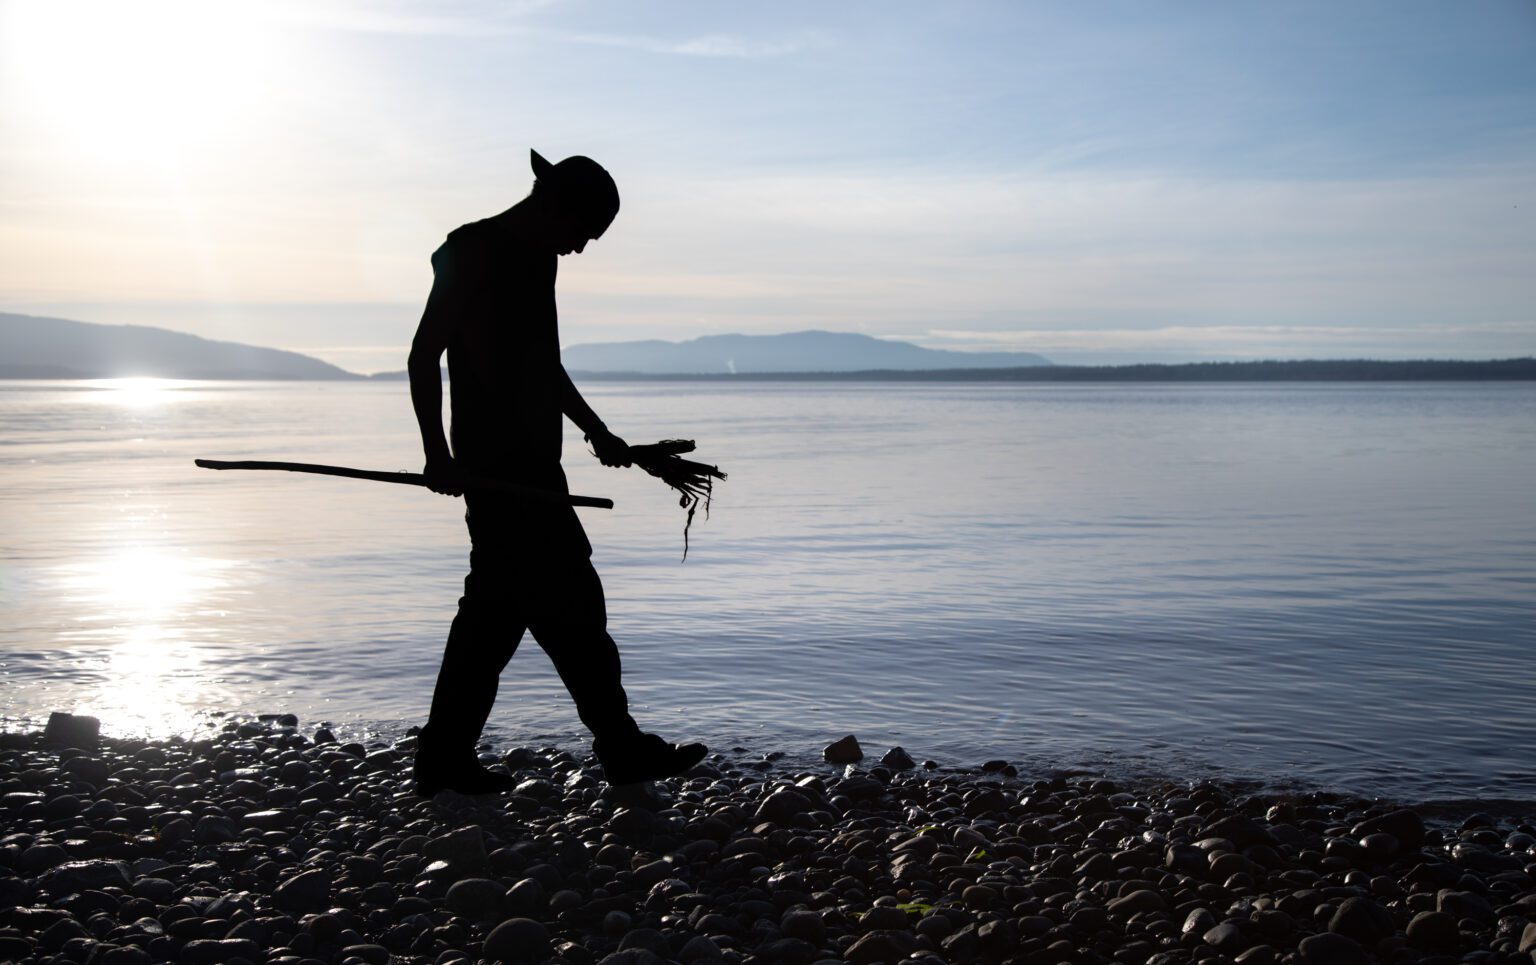 A silhouetted figure walks along a rocky beach as the sun shines over the water behind him.